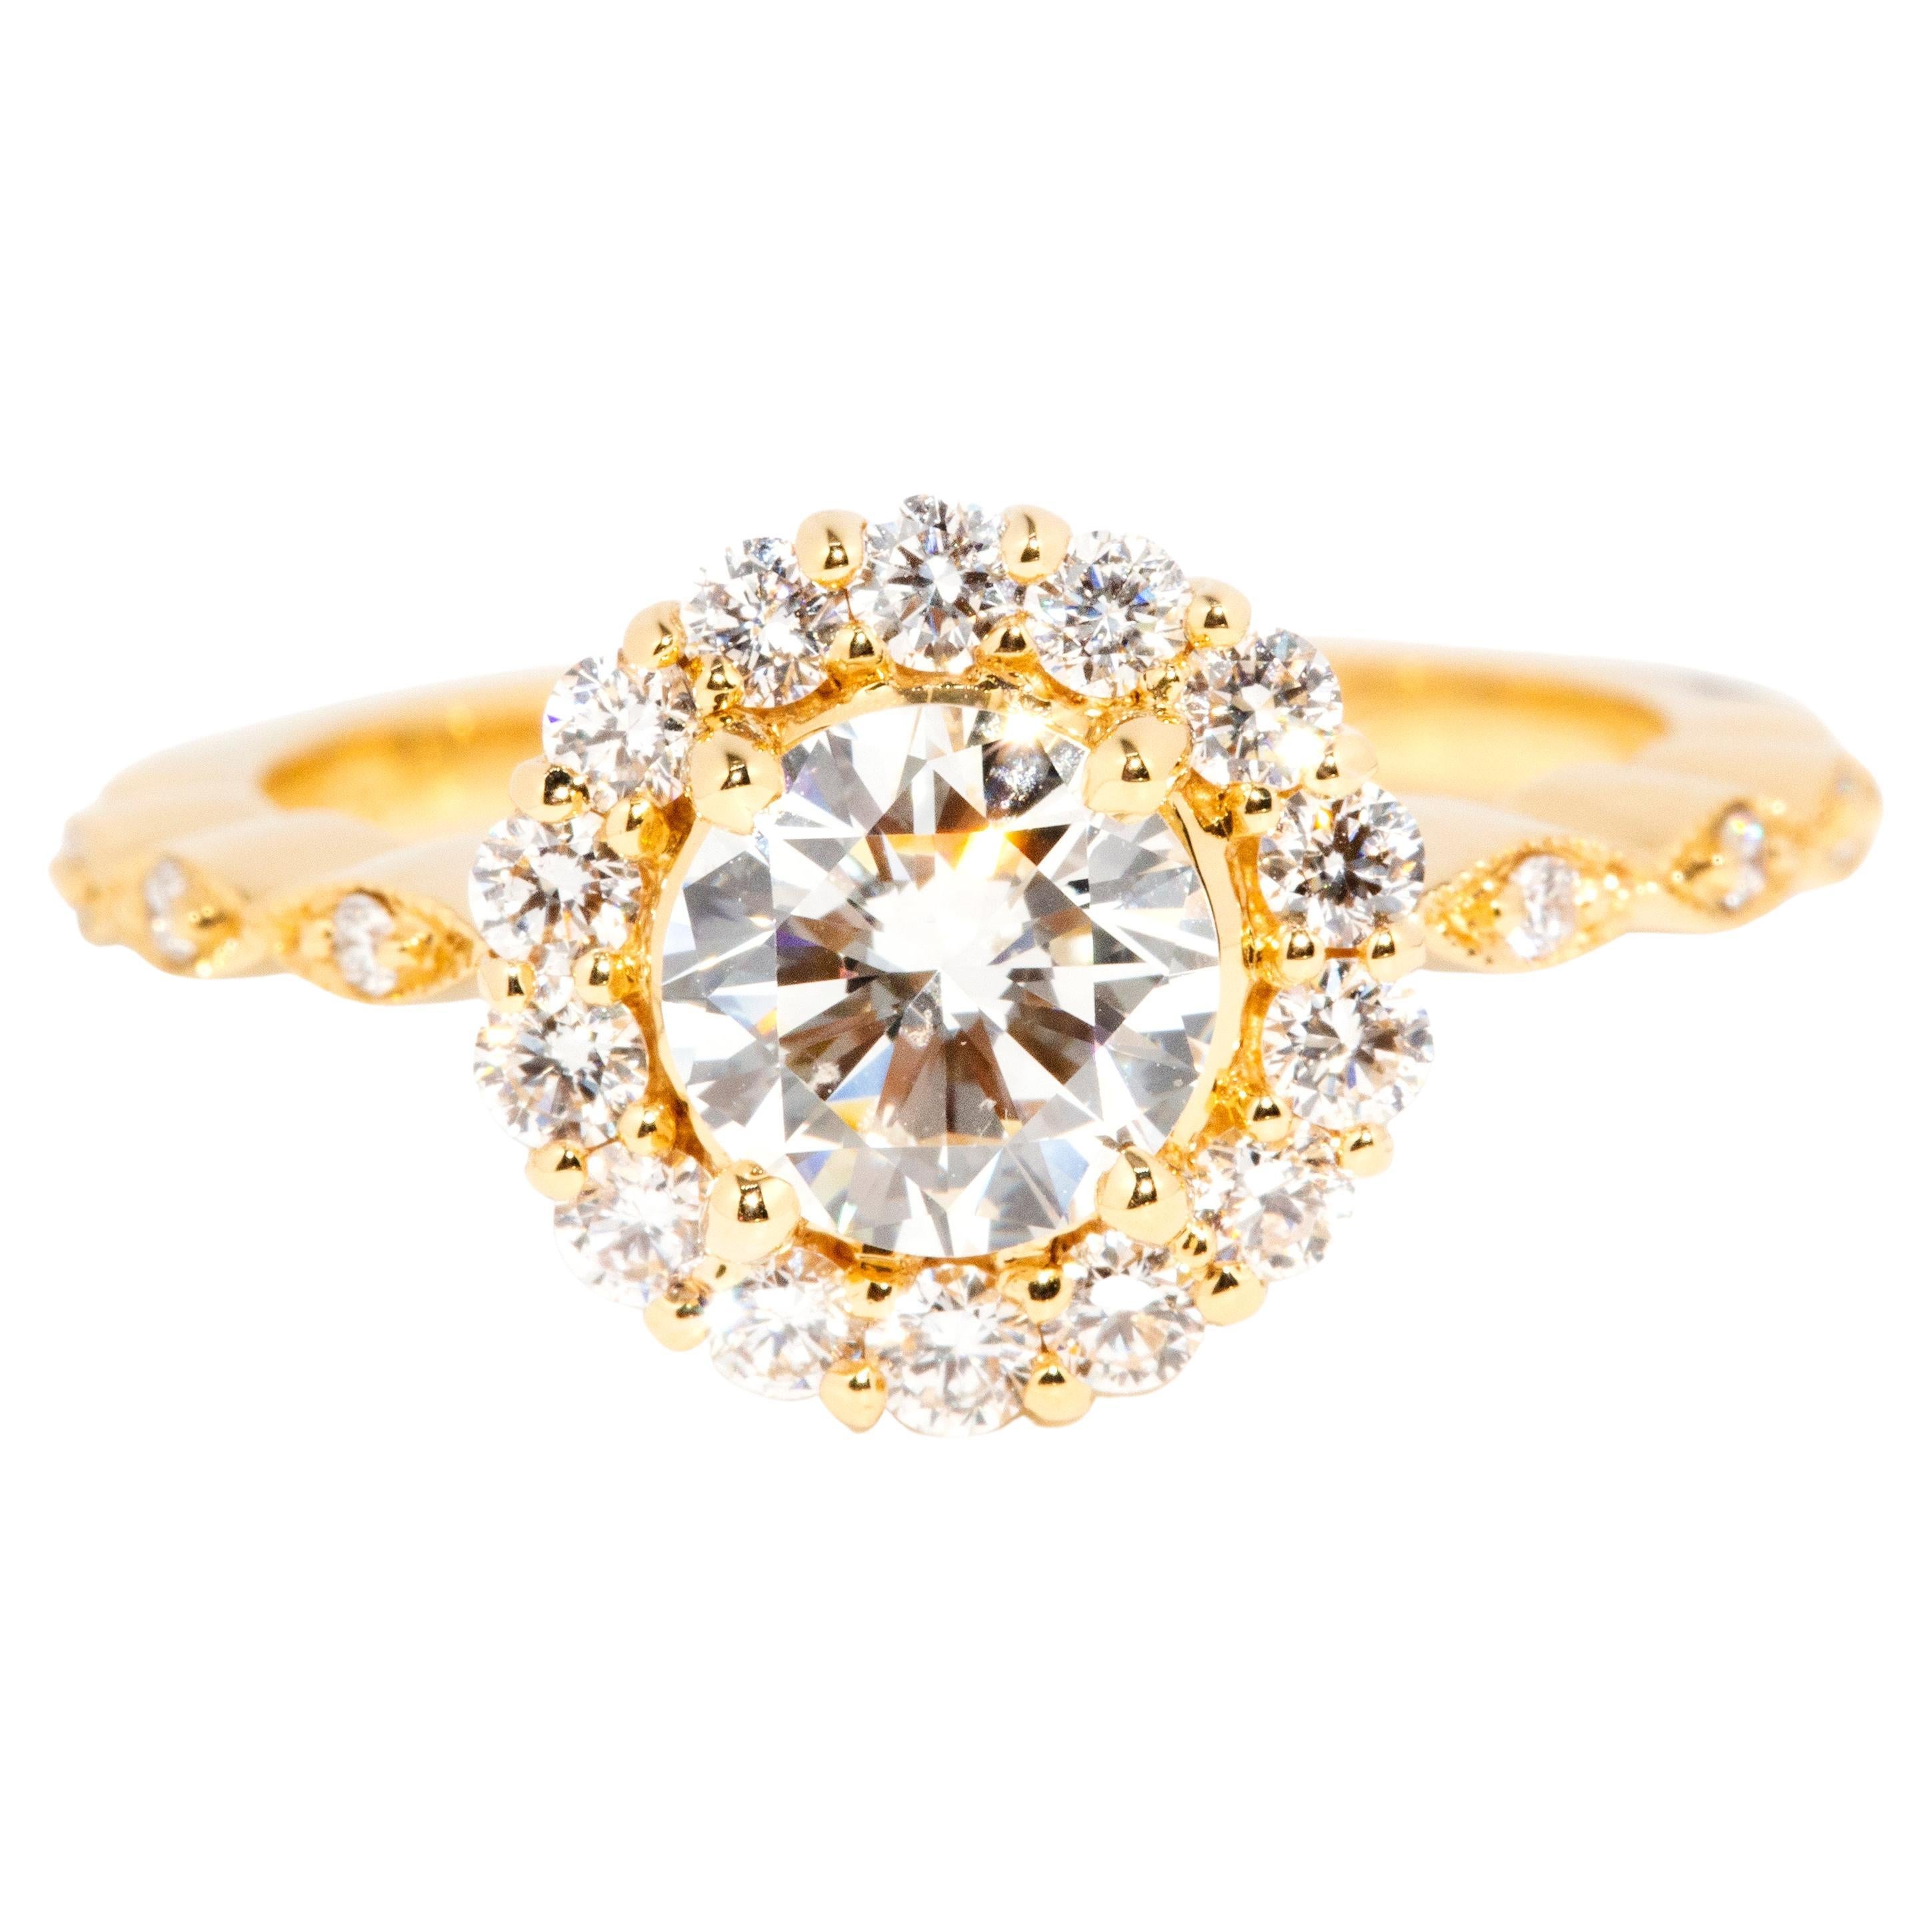 GIA Certified 1.01 Carat Diamond Halo Cluster Ring in 18 Carat Yellow Gold For Sale